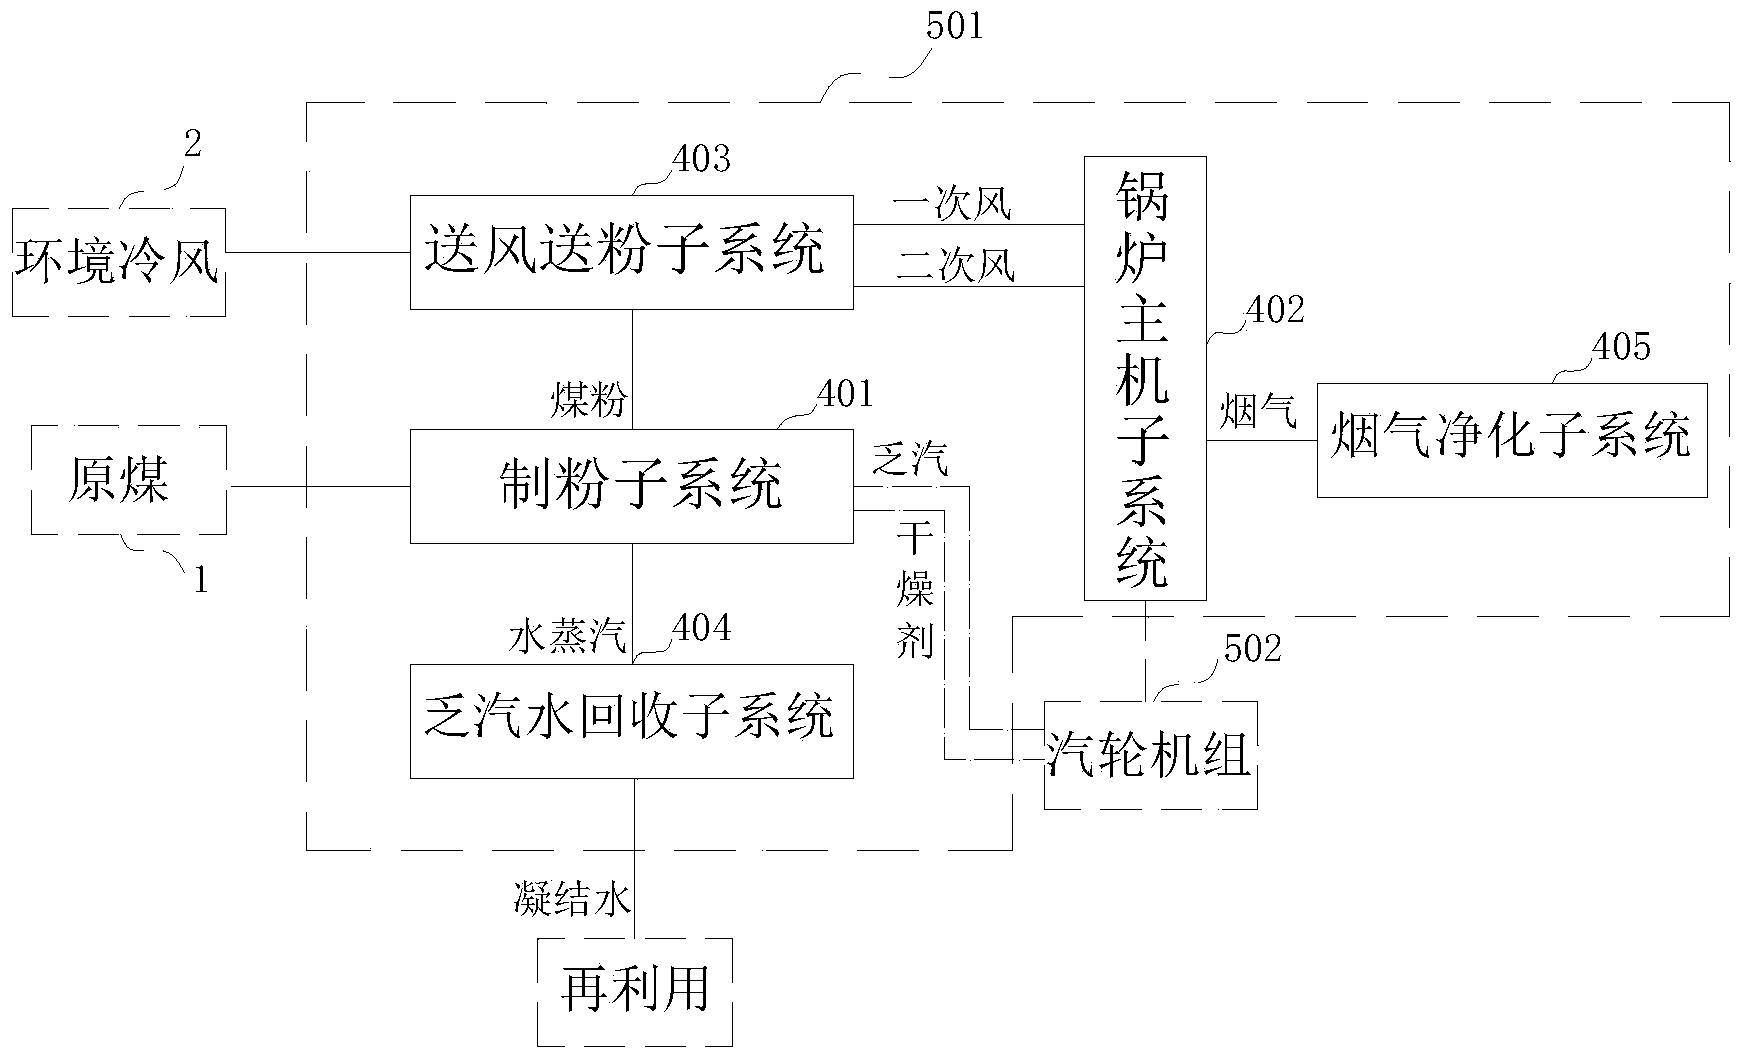 Superheated steam drying power-making coal-fired power generation system